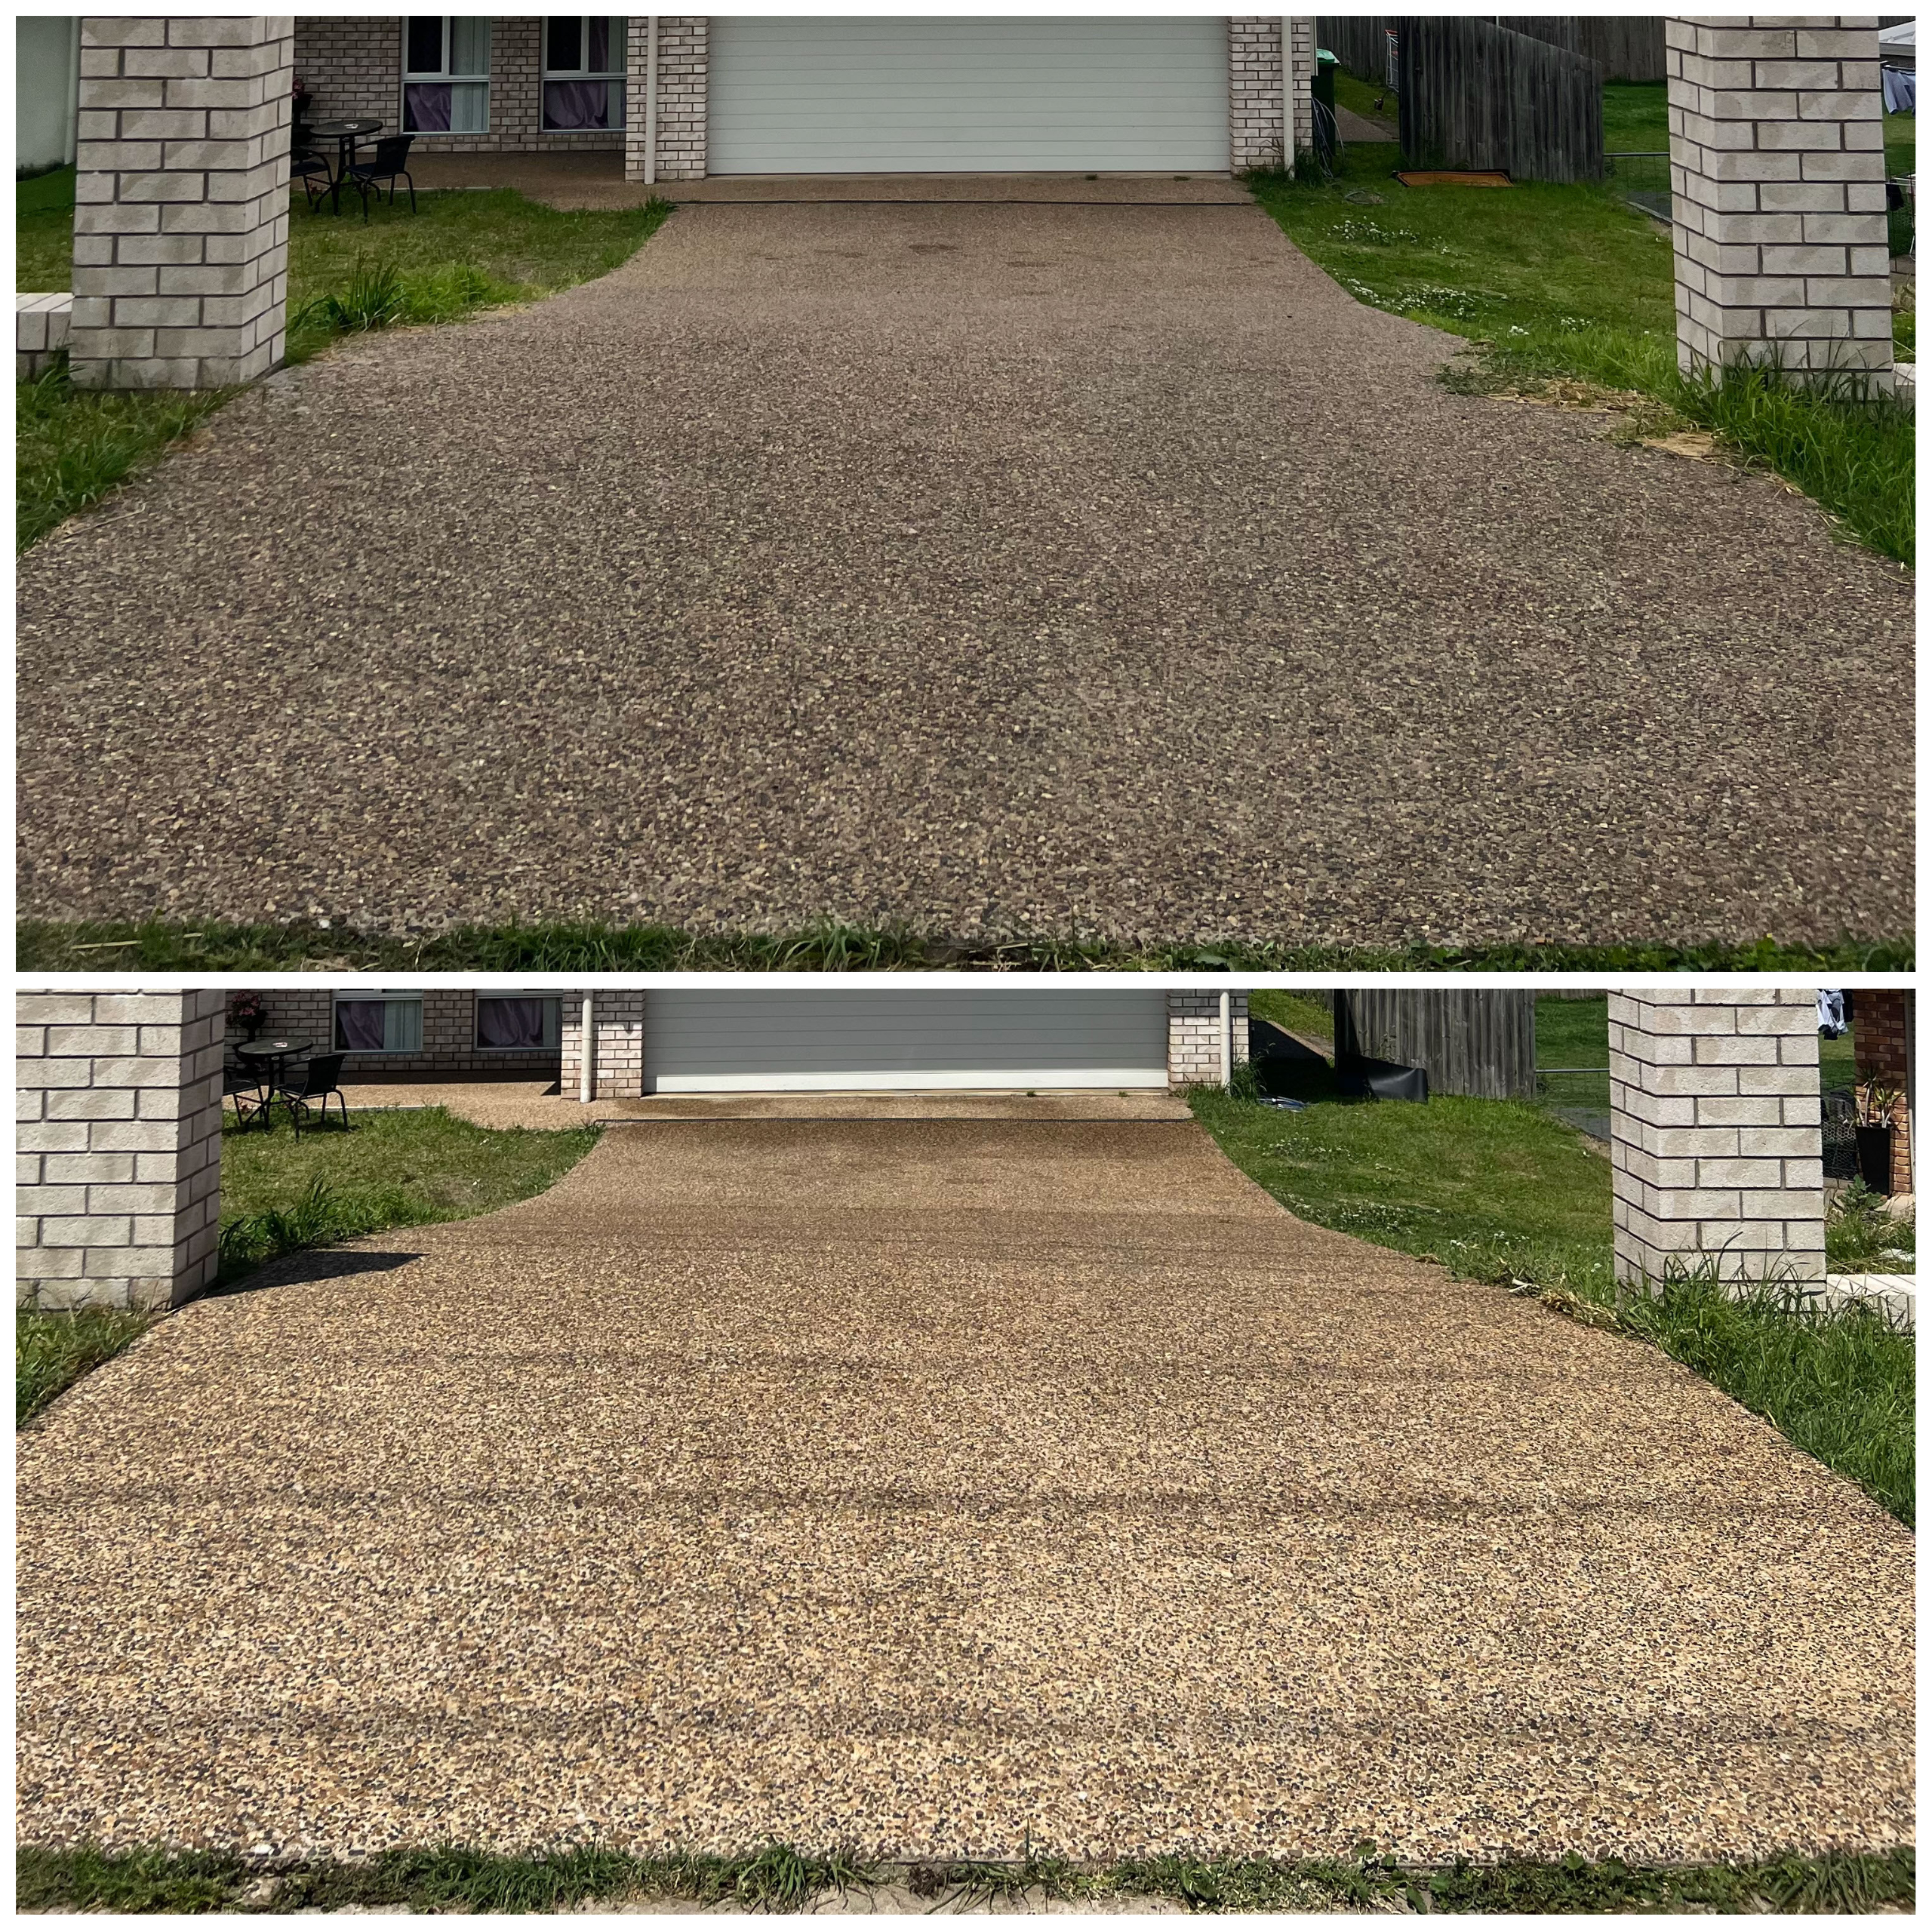 Driveway Cleaning in Glenvale, Toowoomba